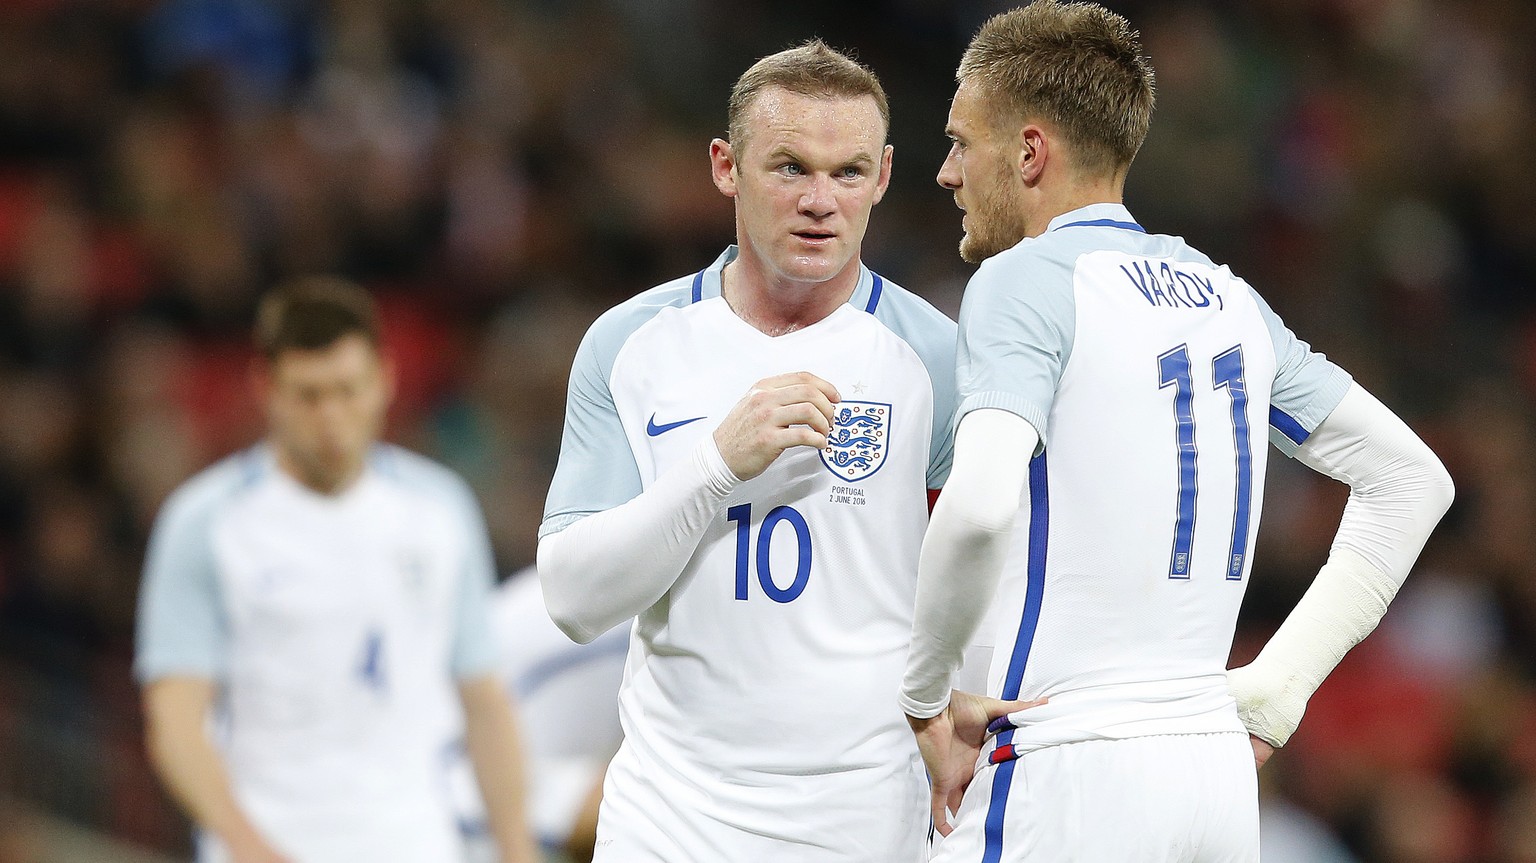 England&#039;s Wayne Rooney, center, talks to England&#039;s Jamie Vardy during the International friendly soccer match between England and Portugal at Wembley stadium in London, England, Thursday, Ju ...